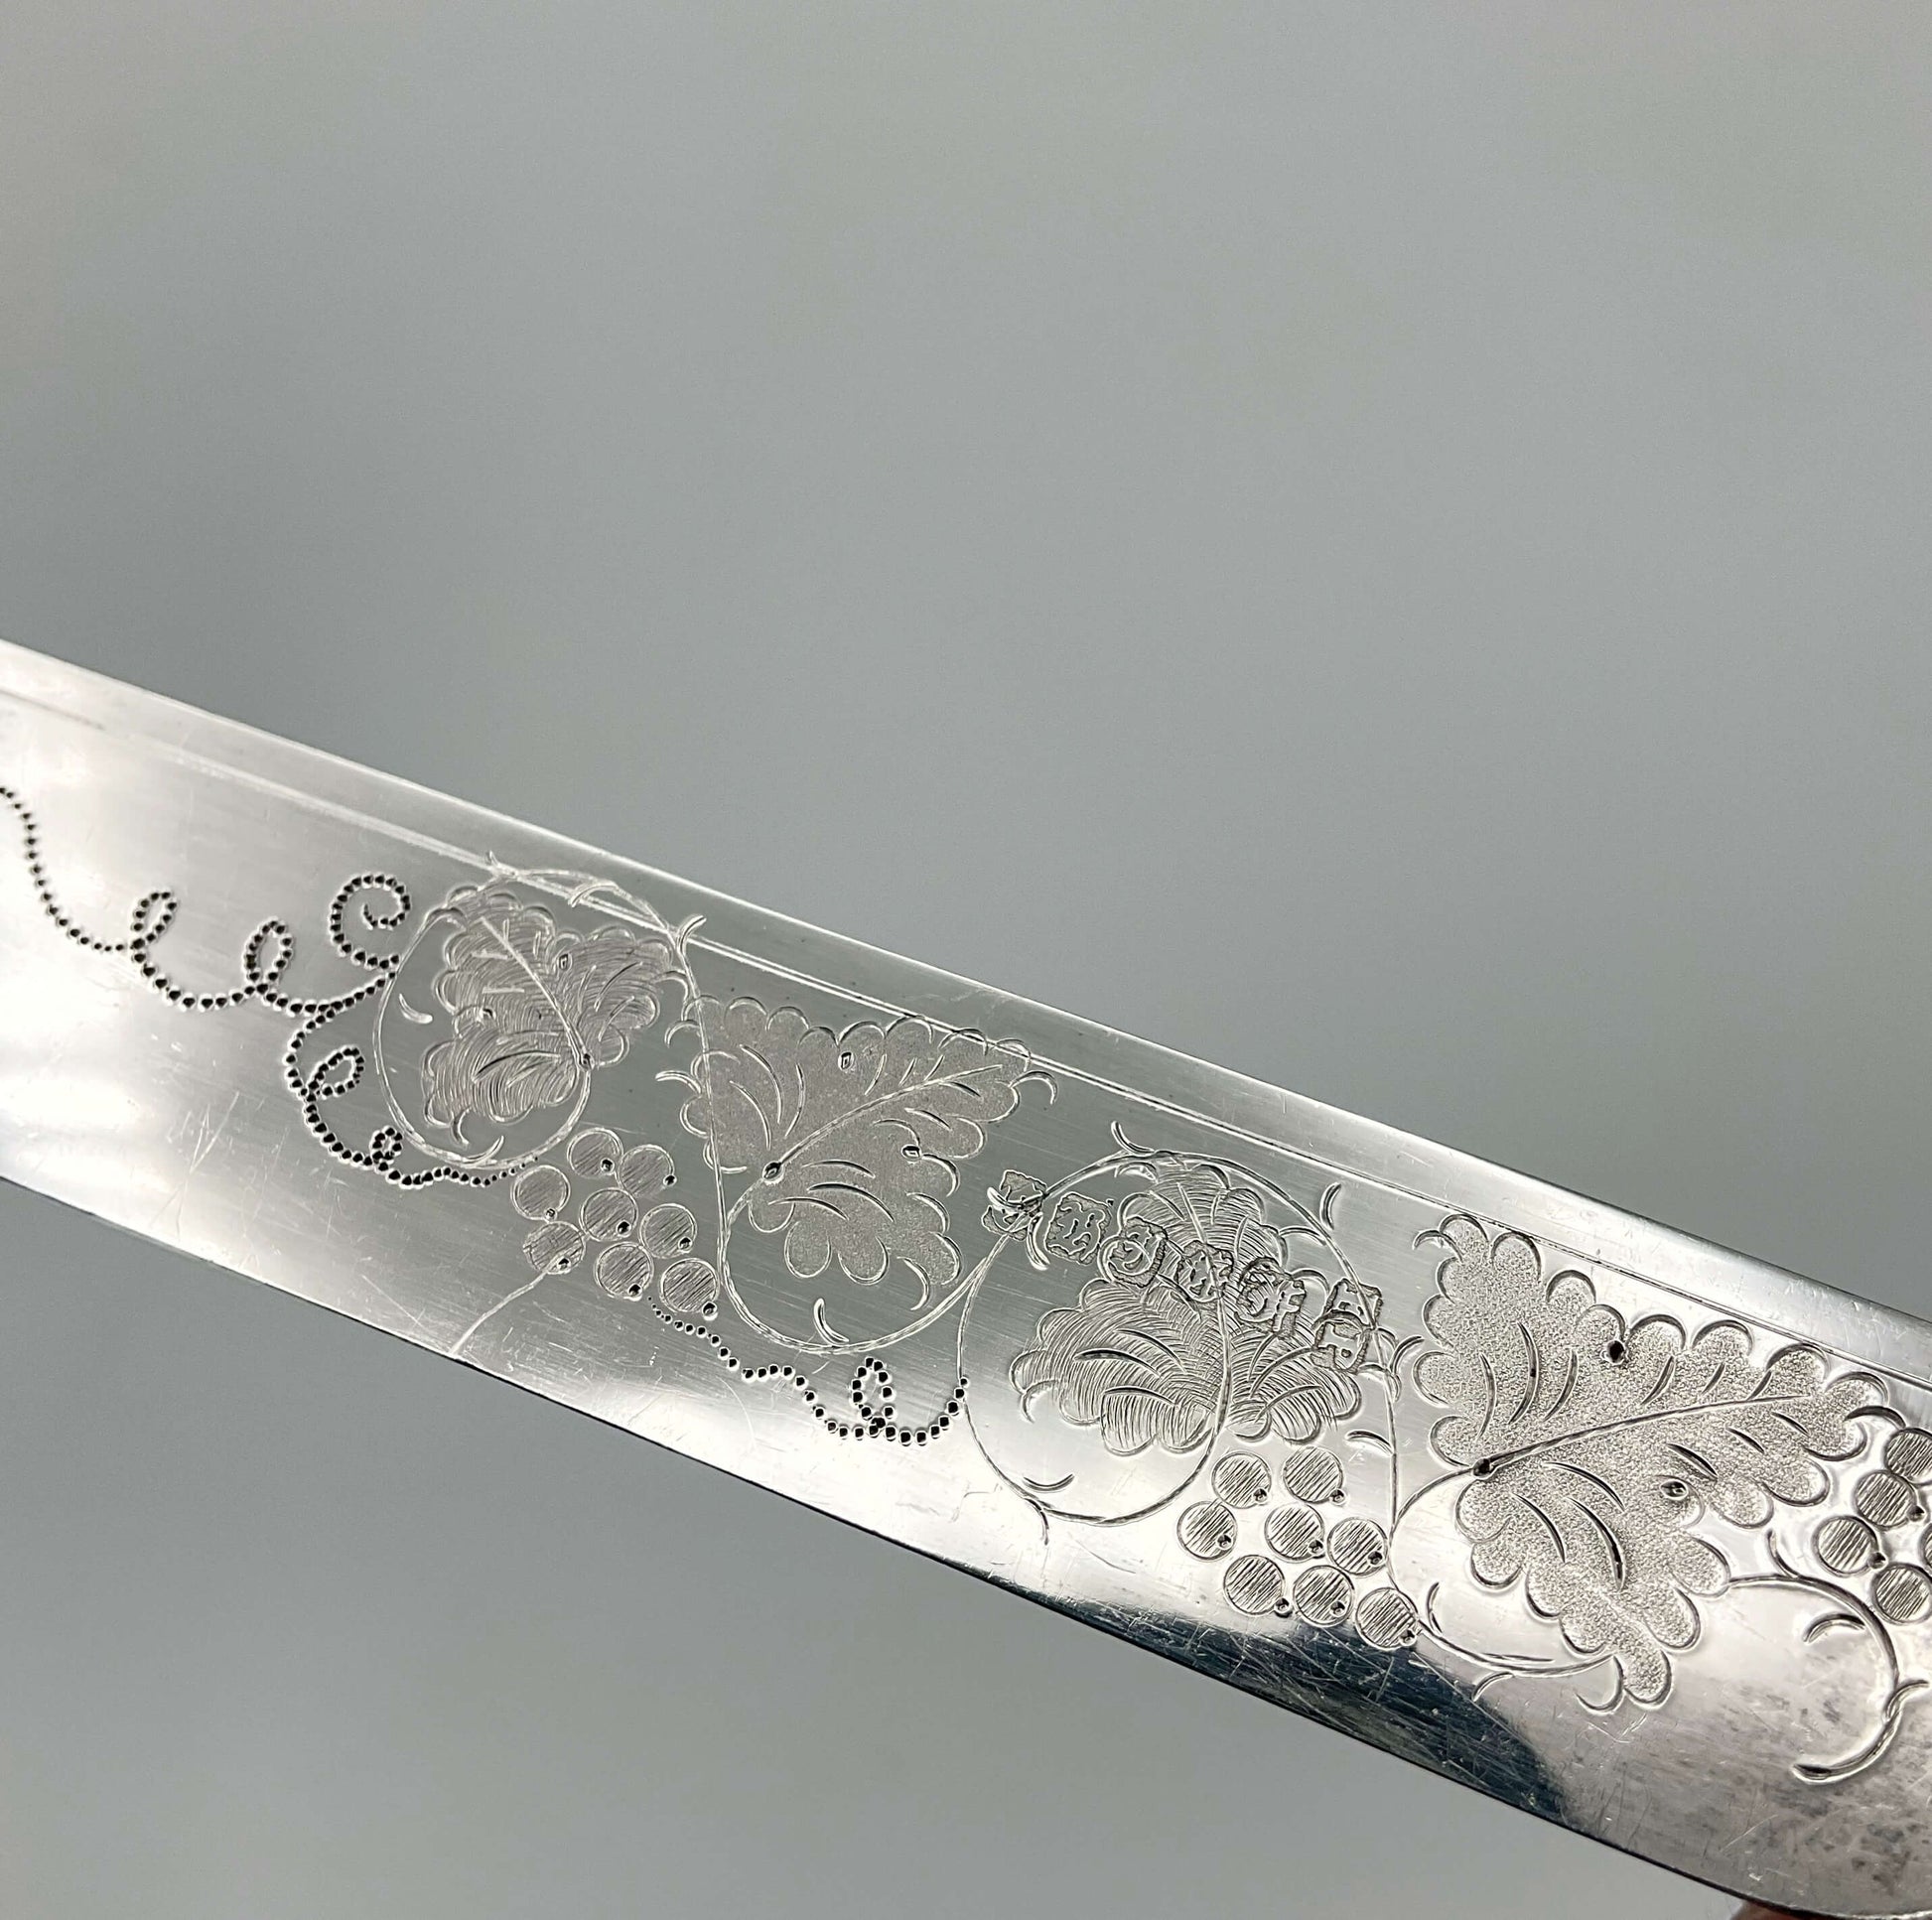 a grape and vine engraved design with the makers mark on a dessert knife blade